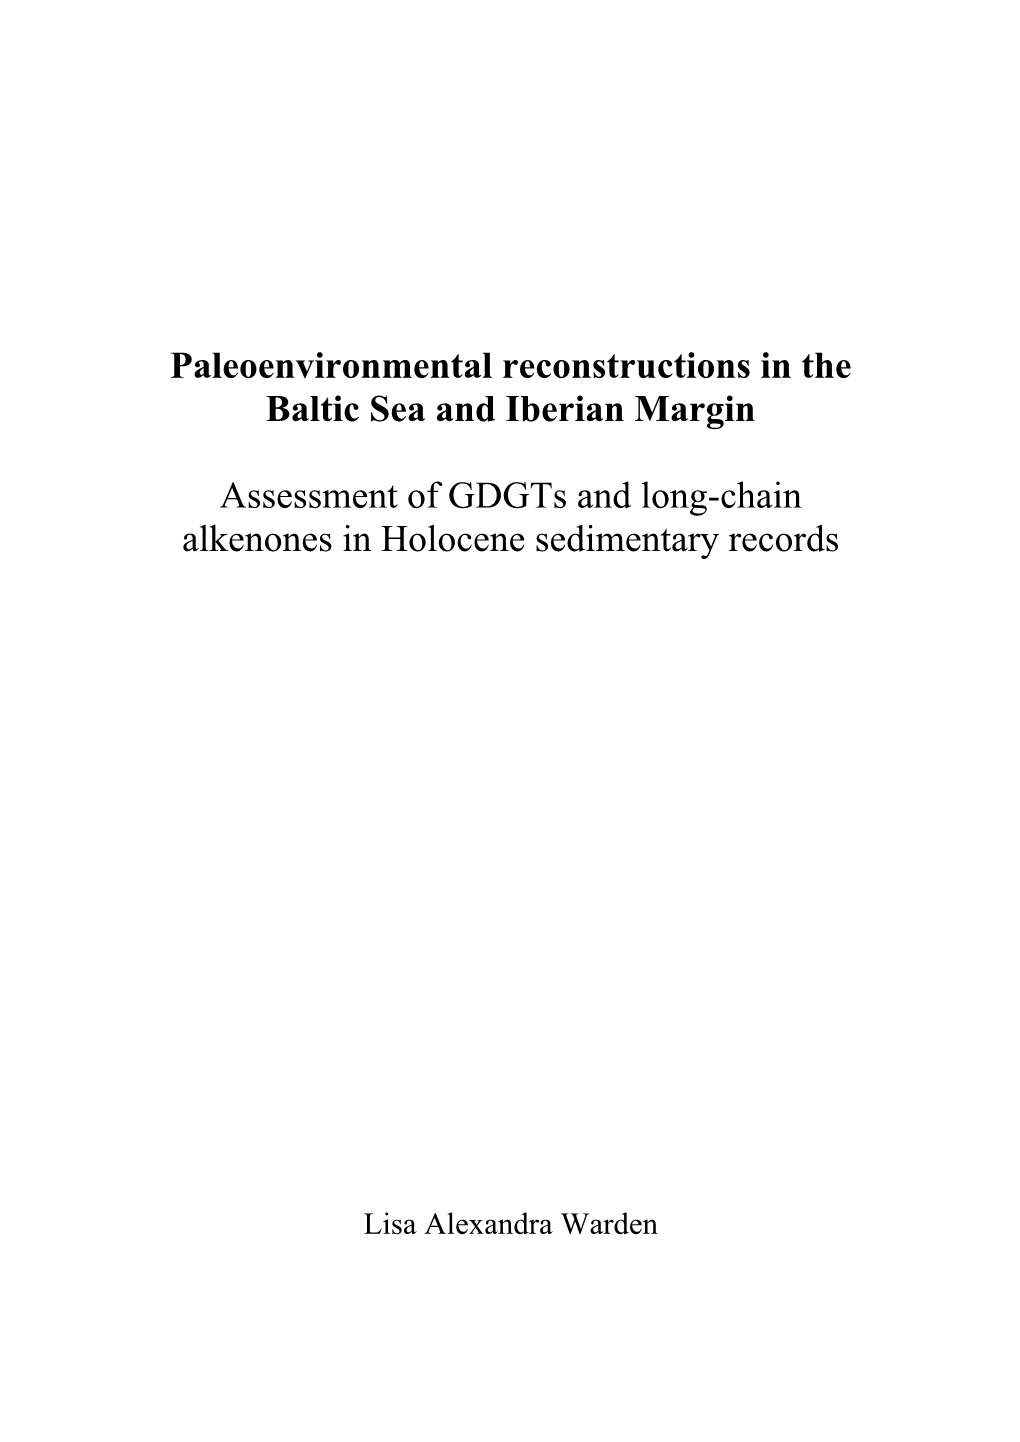 Paleoenvironmental Reconstructions in the Baltic Sea and Iberian Margin